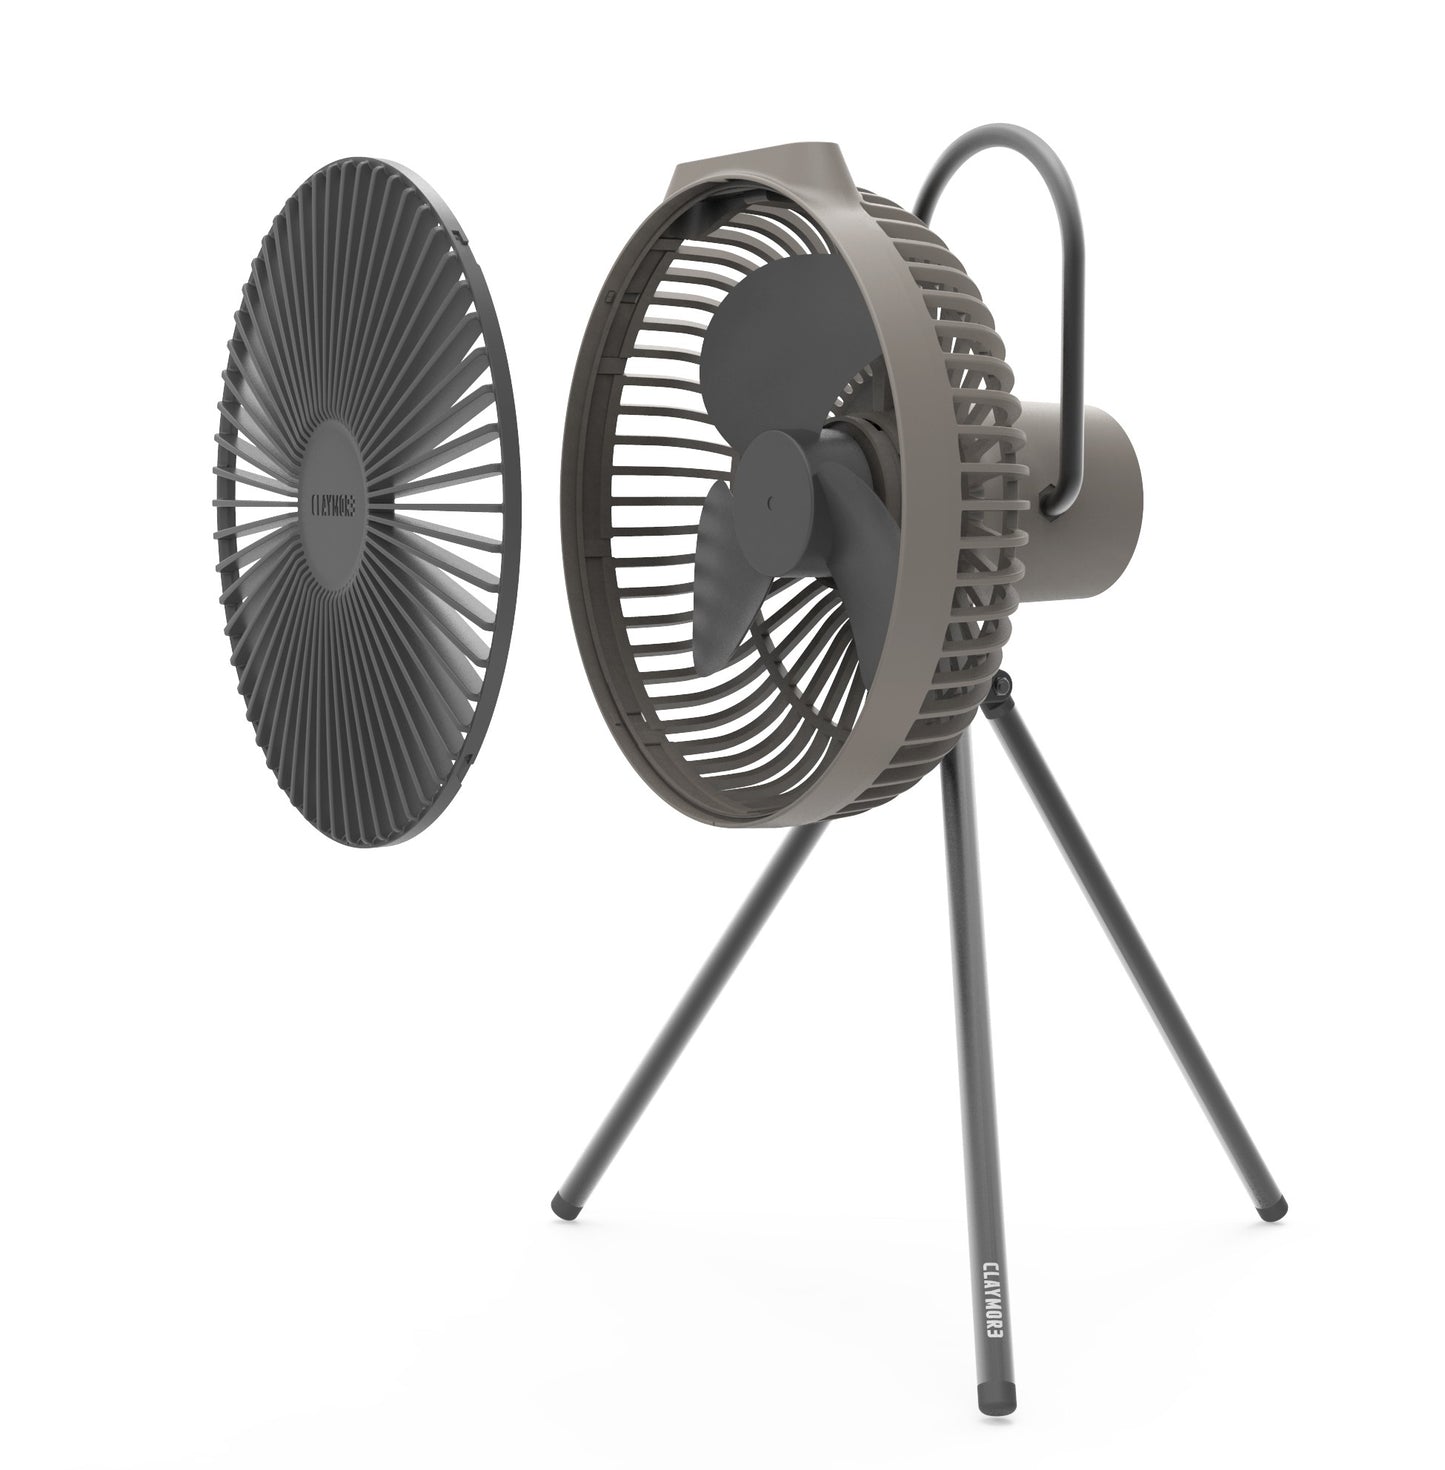 Claymore V600+ USB Rechargeable Portable Fan